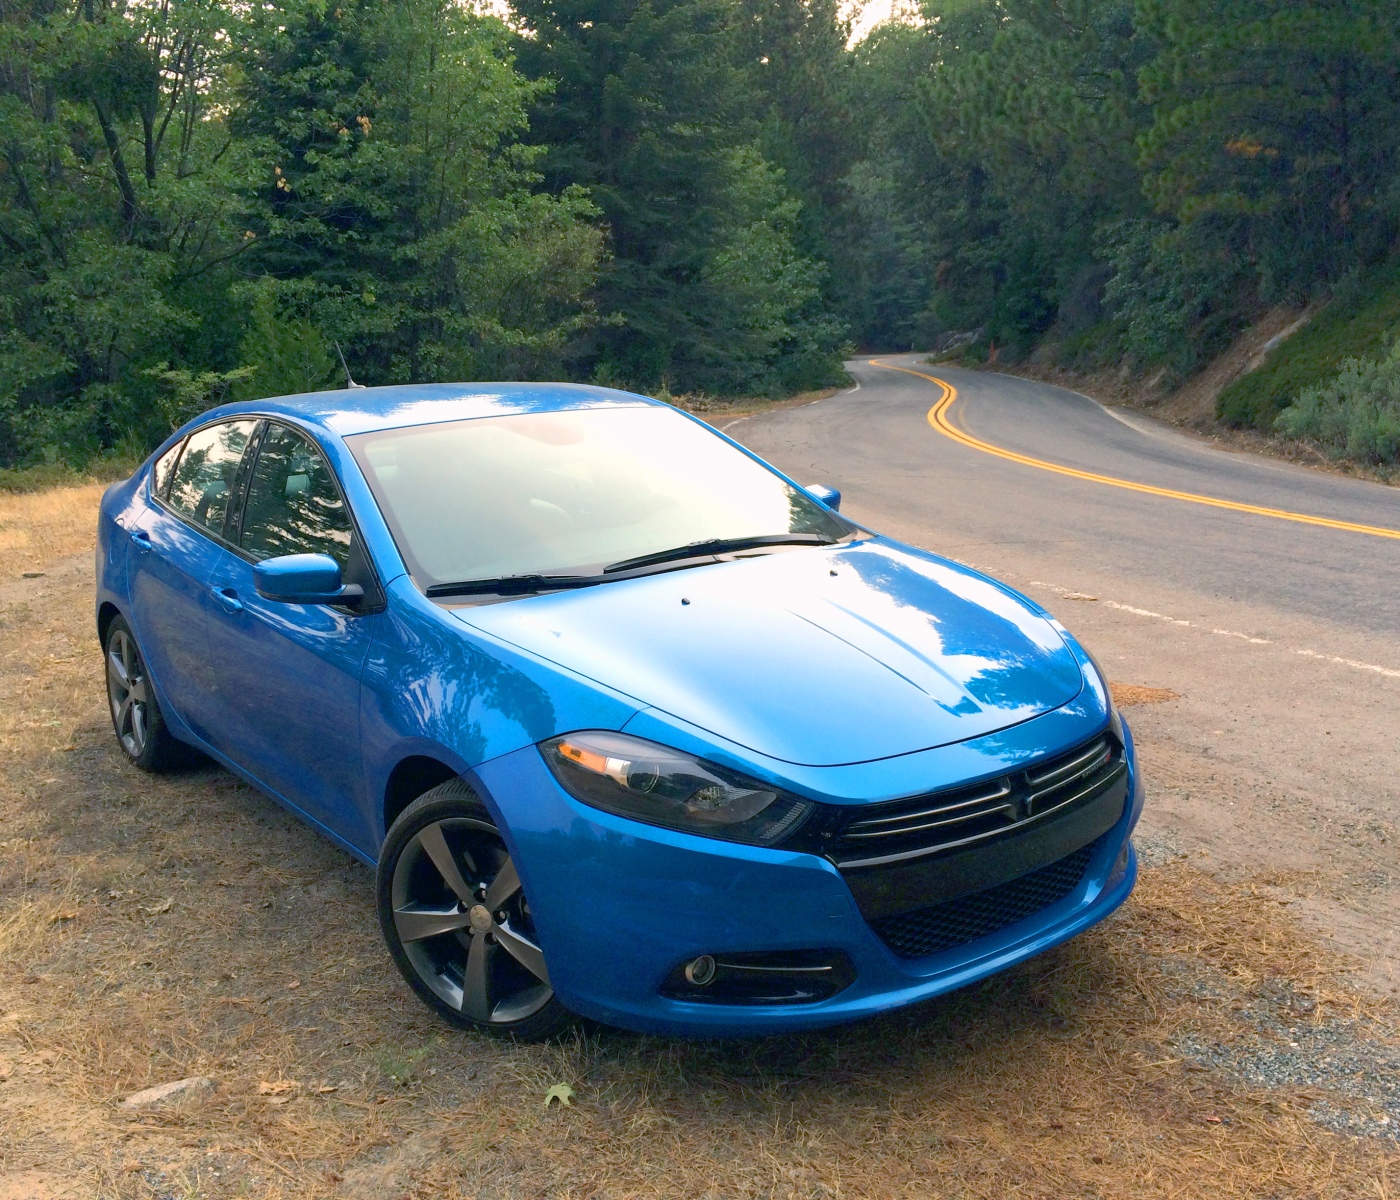 2016 Dodge Dart Test Drive and Review – The Review Garage